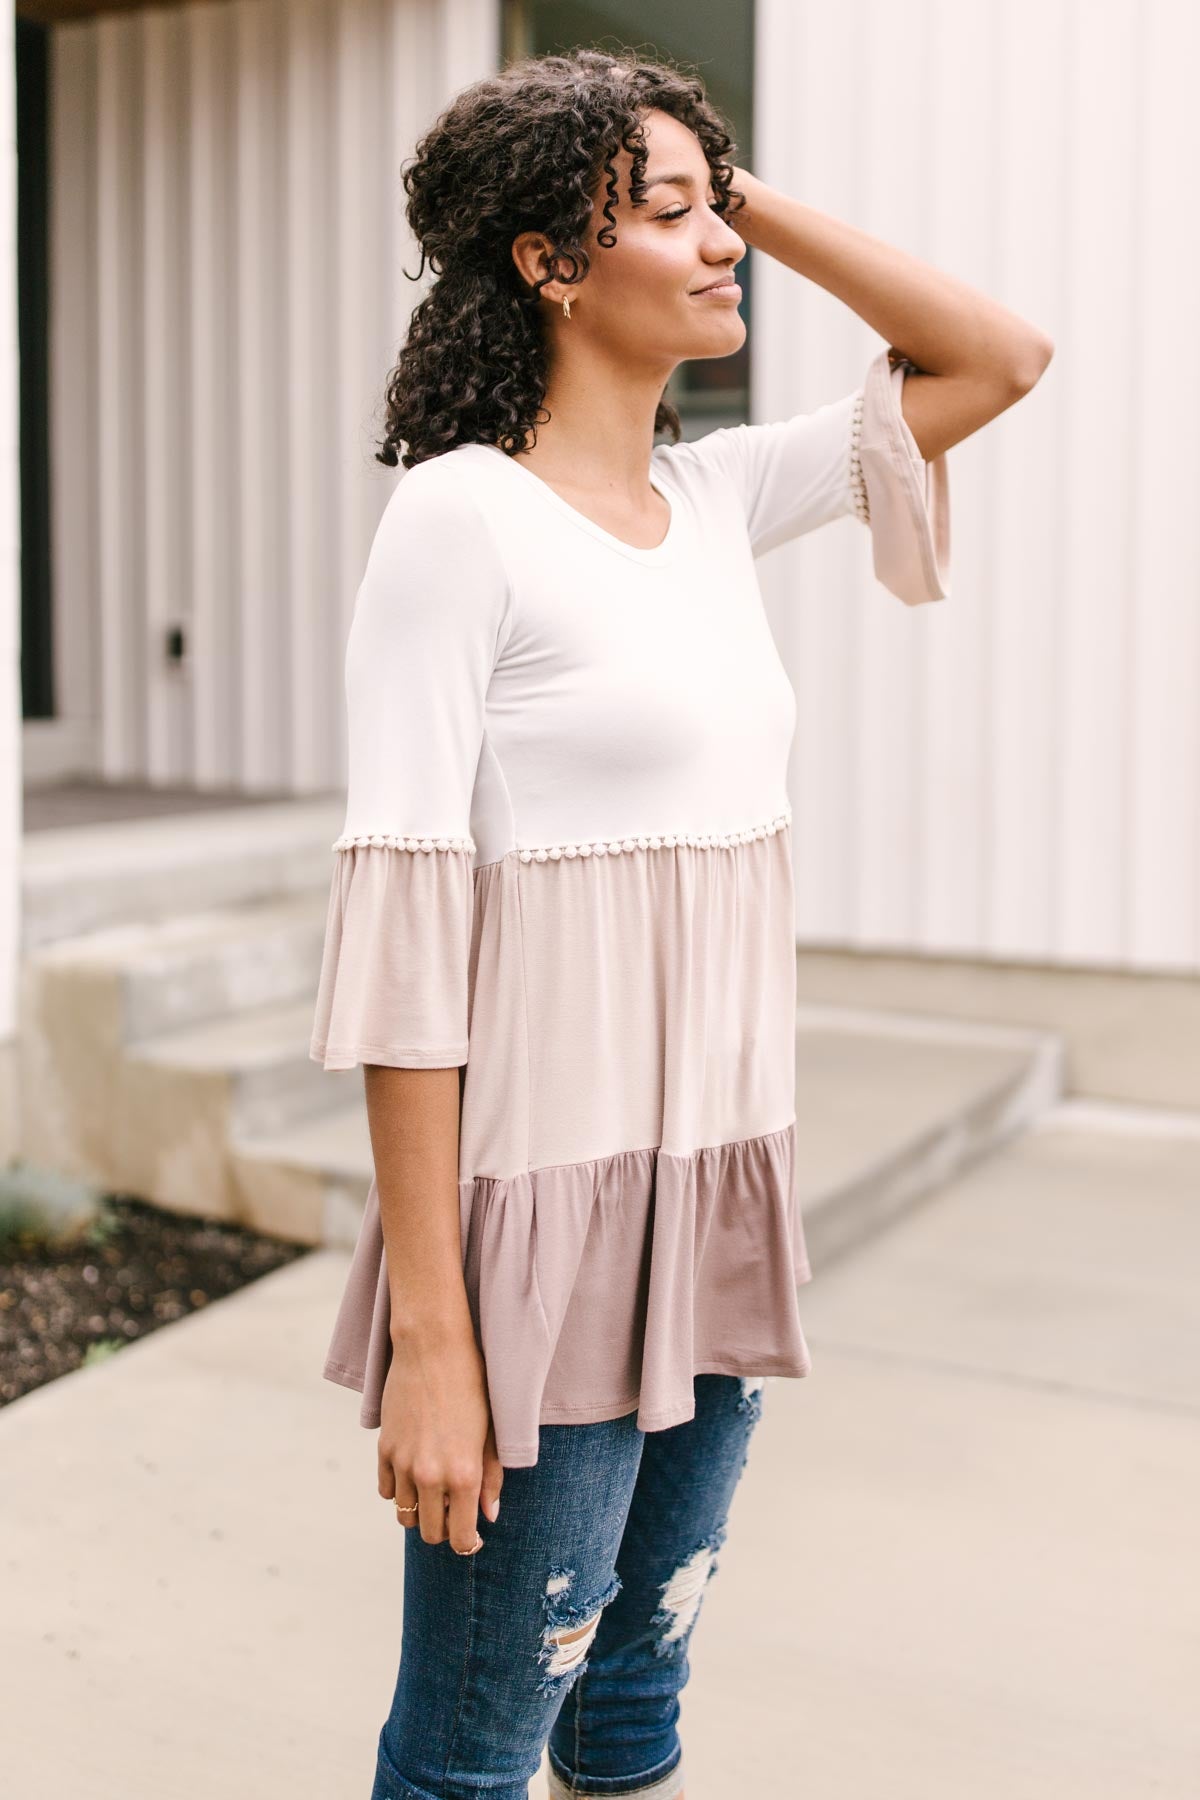 The Fanciful Flowing Top In Mocha